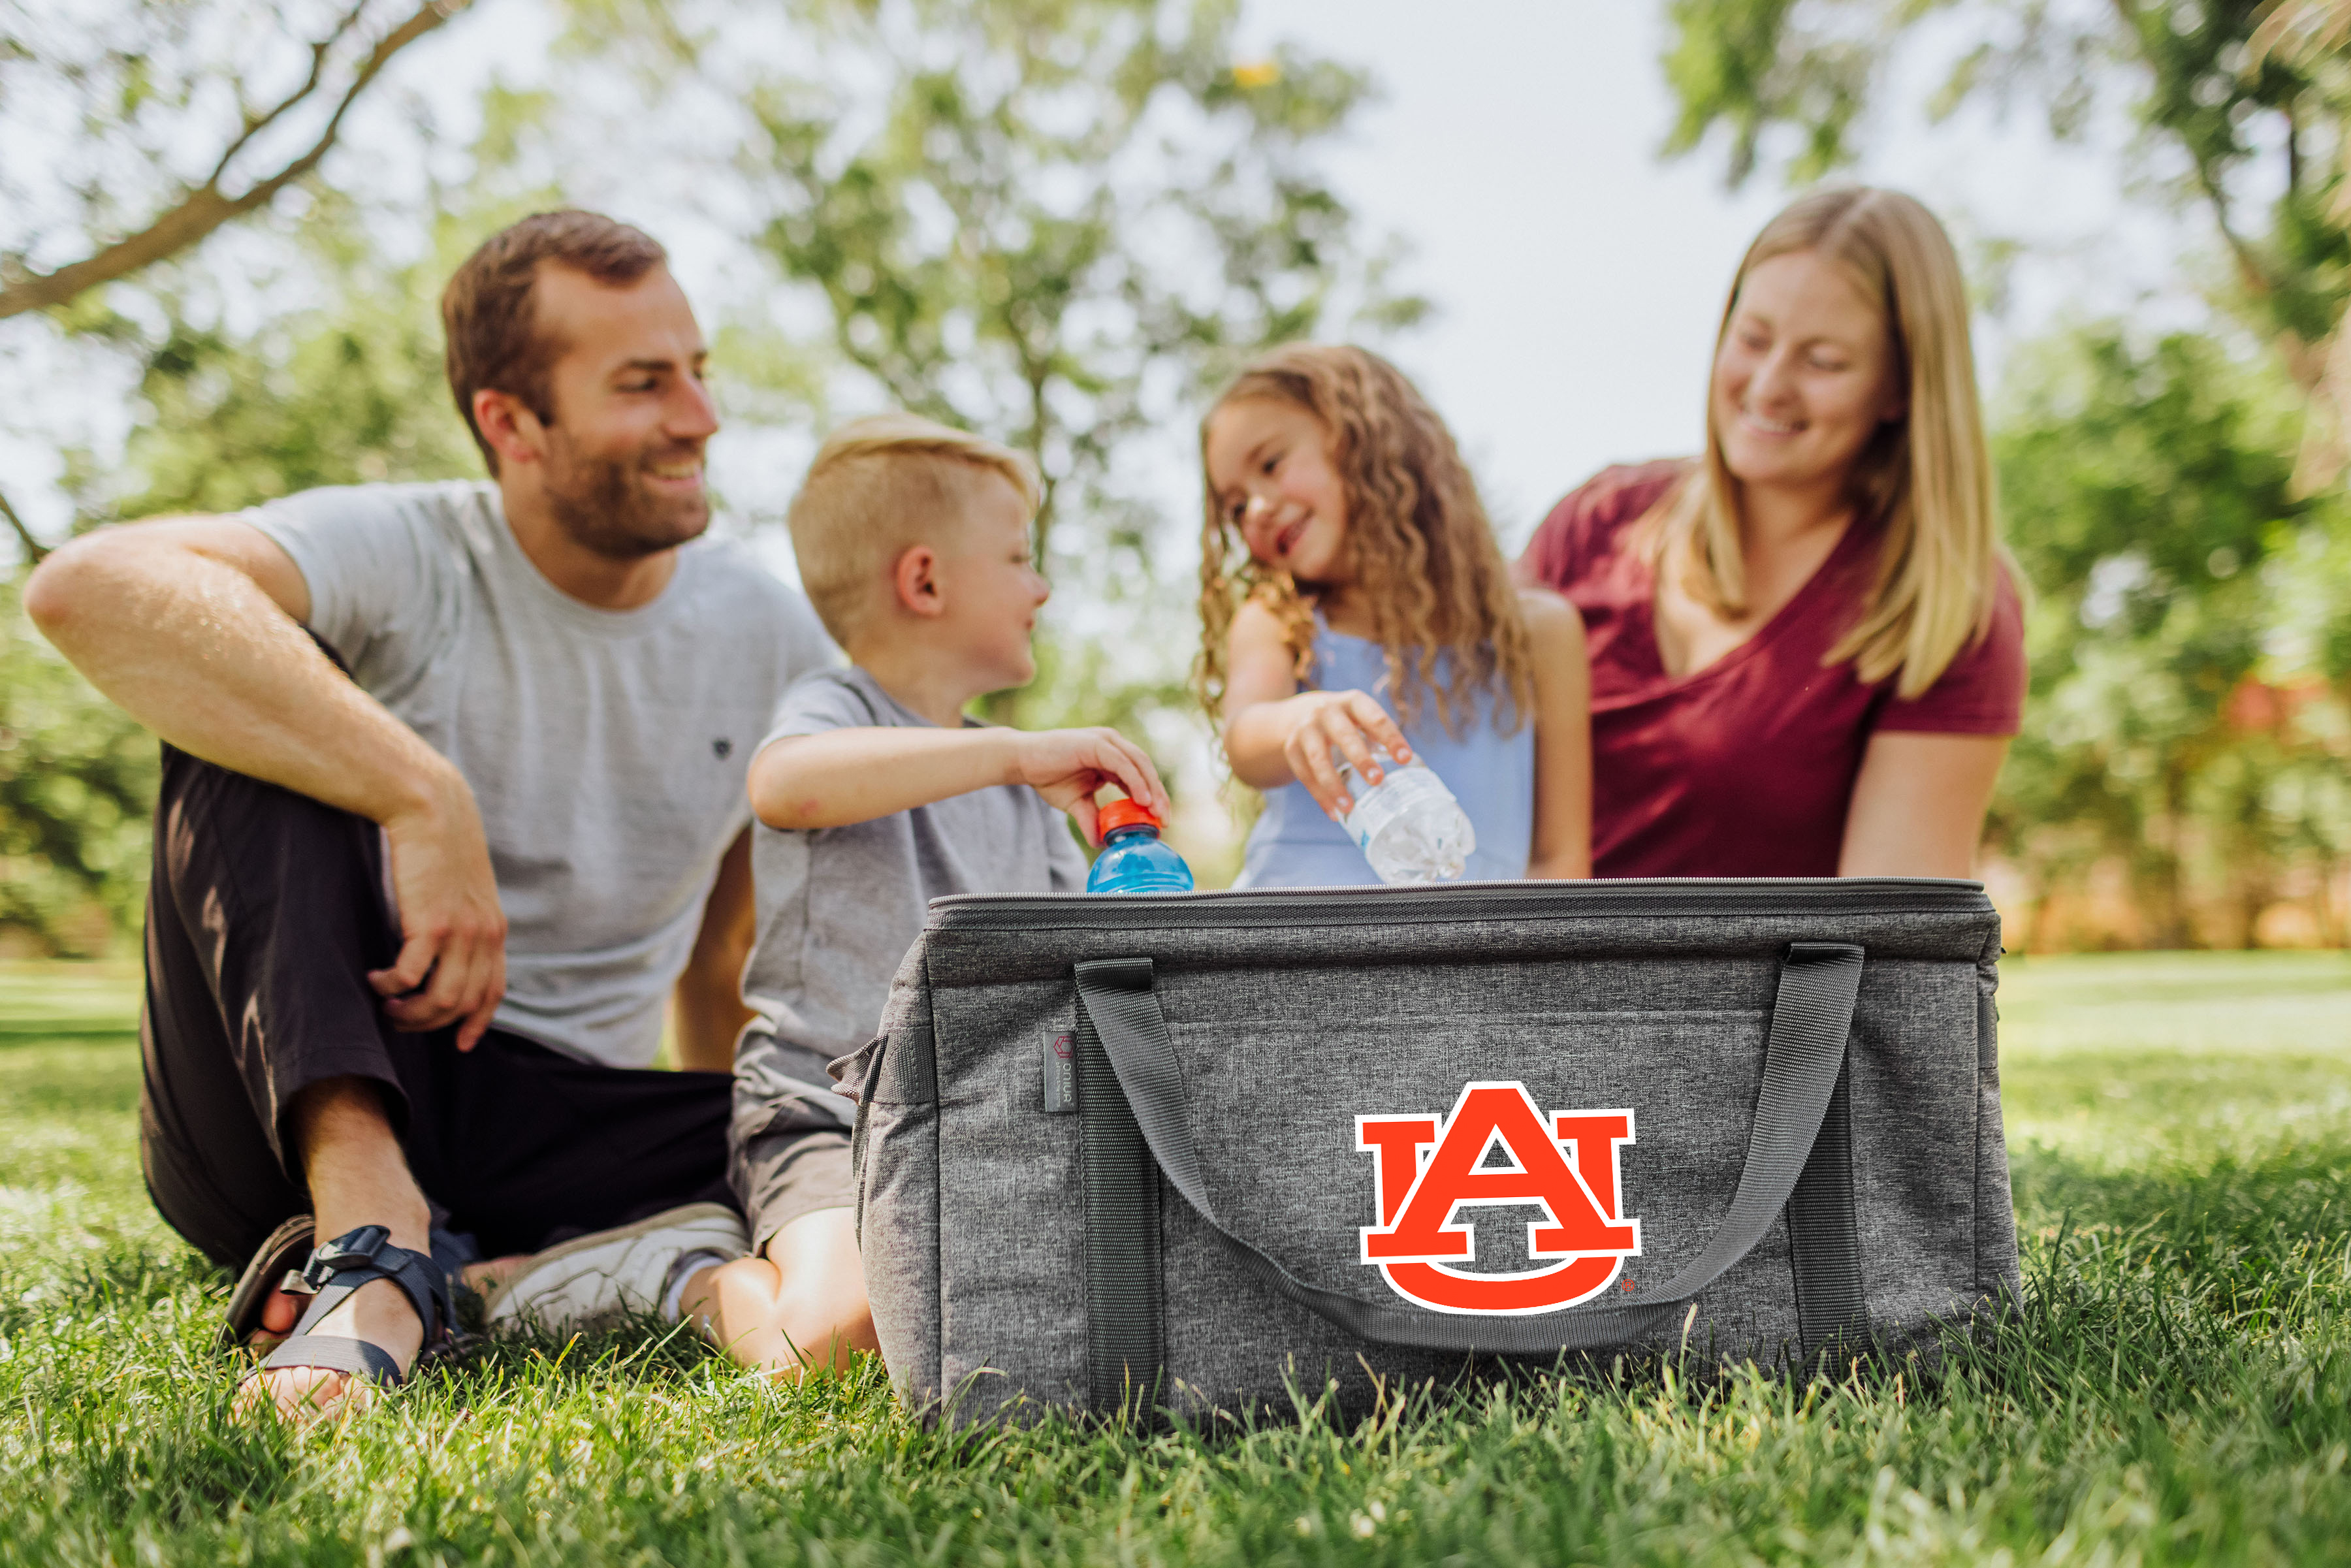 Auburn Tigers - 64 Can Collapsible Cooler